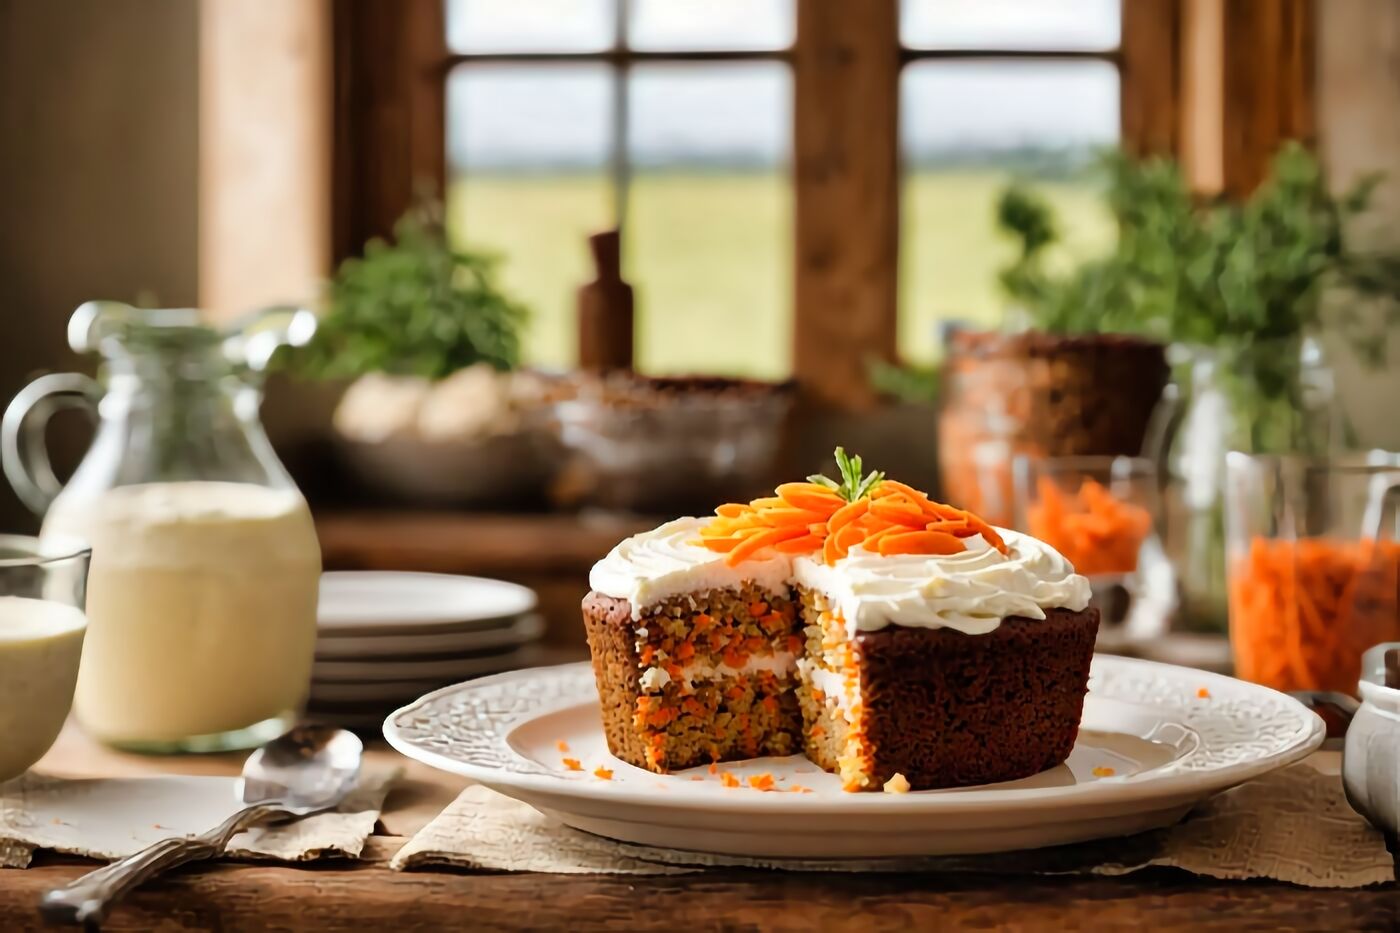 South African Carrot Cake Recipe